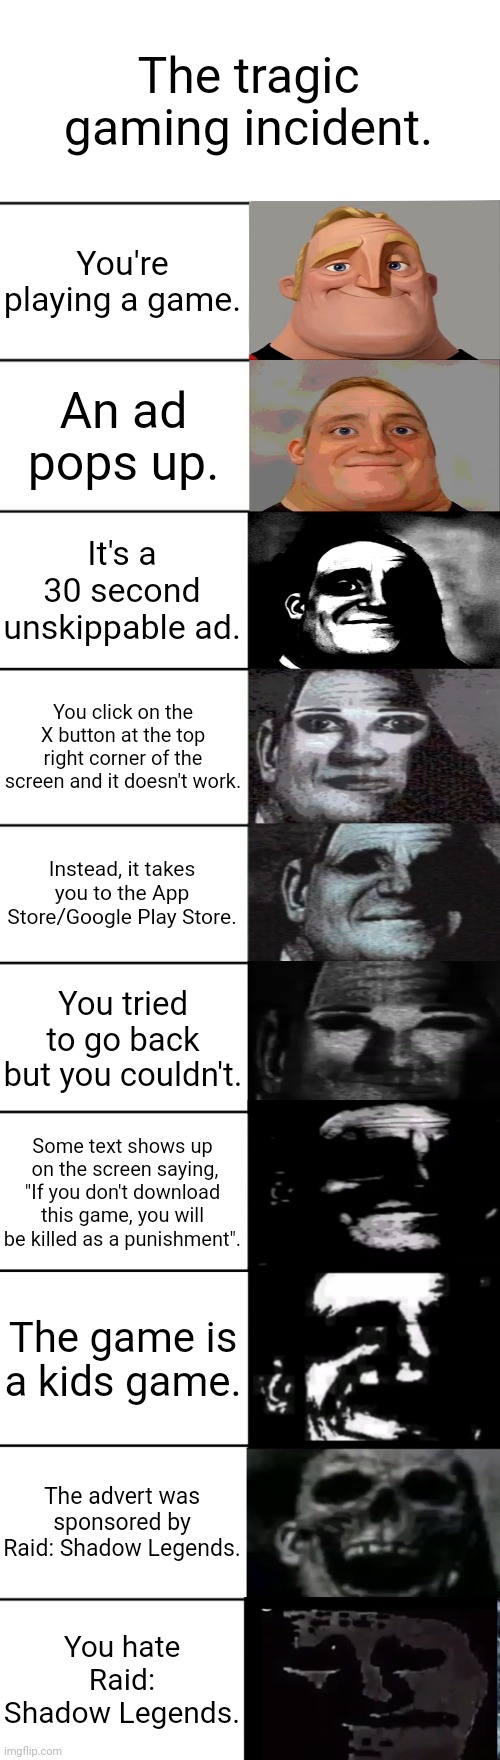 Just a random meme | The tragic gaming incident. You're playing a game. An ad pops up. It's a 30 second unskippable ad. You click on the X button at the top right corner of the screen and it doesn't work. Instead, it takes you to the App Store/Google Play Store. You tried to go back but you couldn't. Some text shows up  on the screen saying, "If you don't download this game, you will be killed as a punishment". The game is a kids game. The advert was sponsored by Raid: Shadow Legends. You hate Raid: Shadow Legends. | image tagged in mr incredible becoming uncanny | made w/ Imgflip meme maker